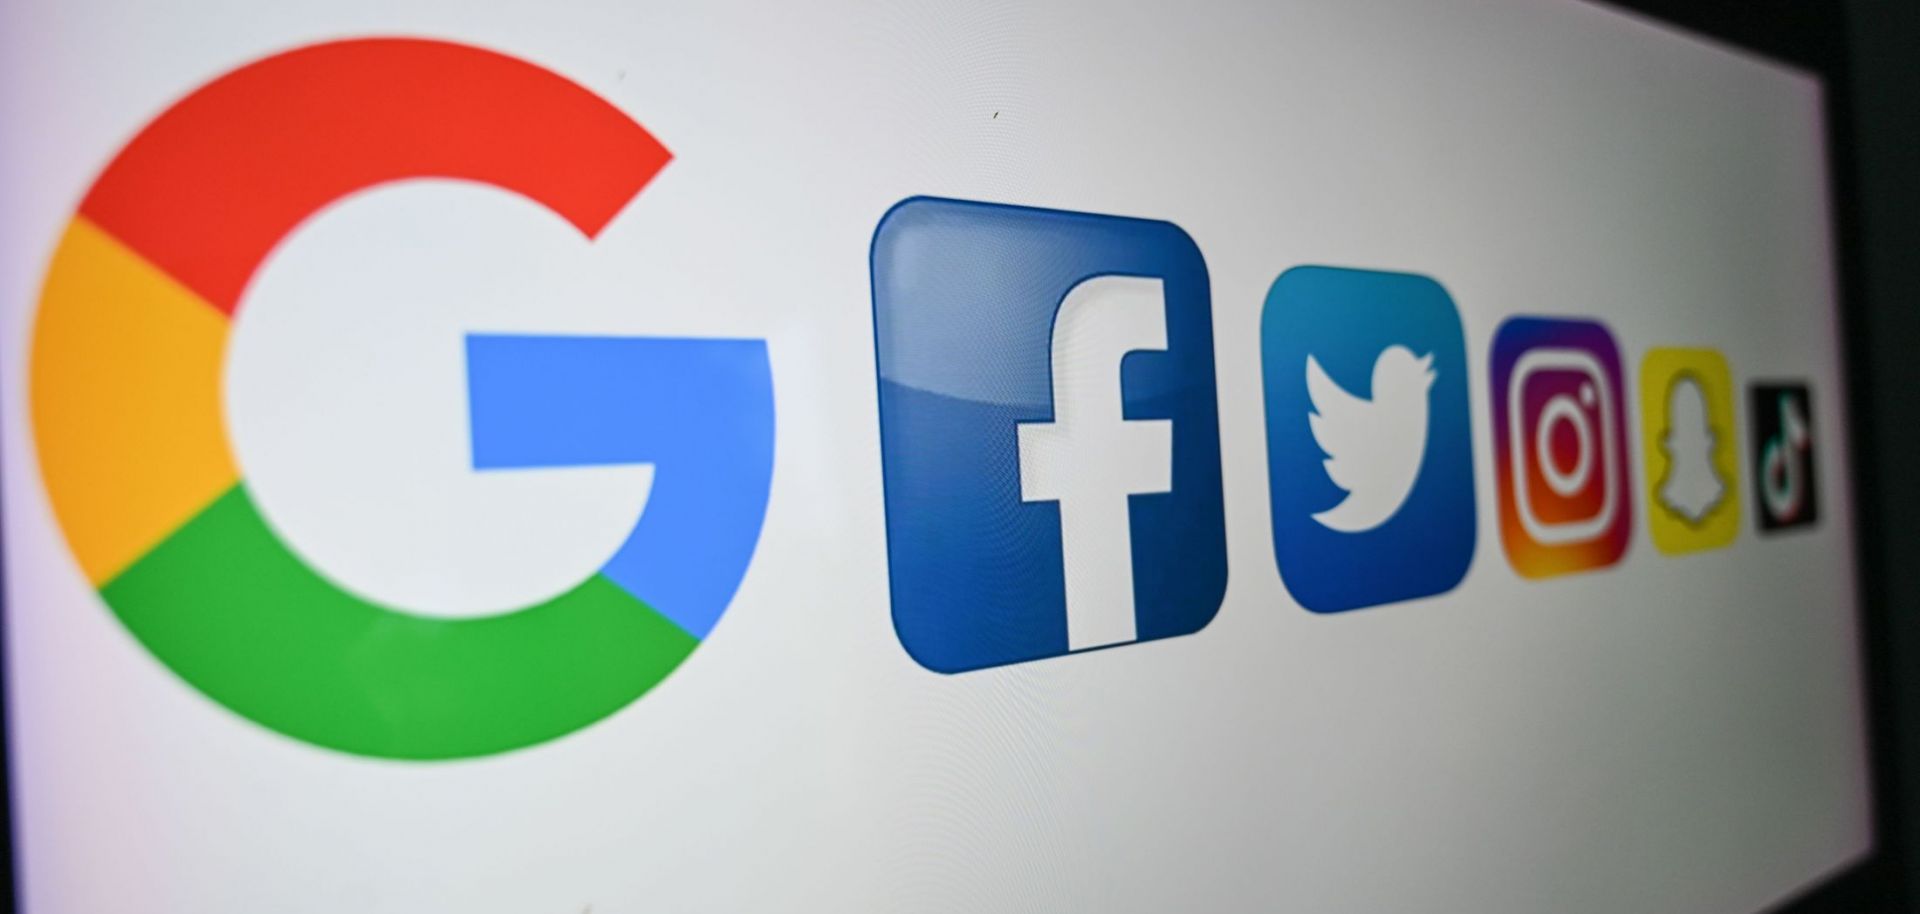 A photo taken on Oct. 21, 2020, shows the logos (left to right) of Google, Facebook, Twitter, Instagram, Snapchat and TikTok on a computer screen. 